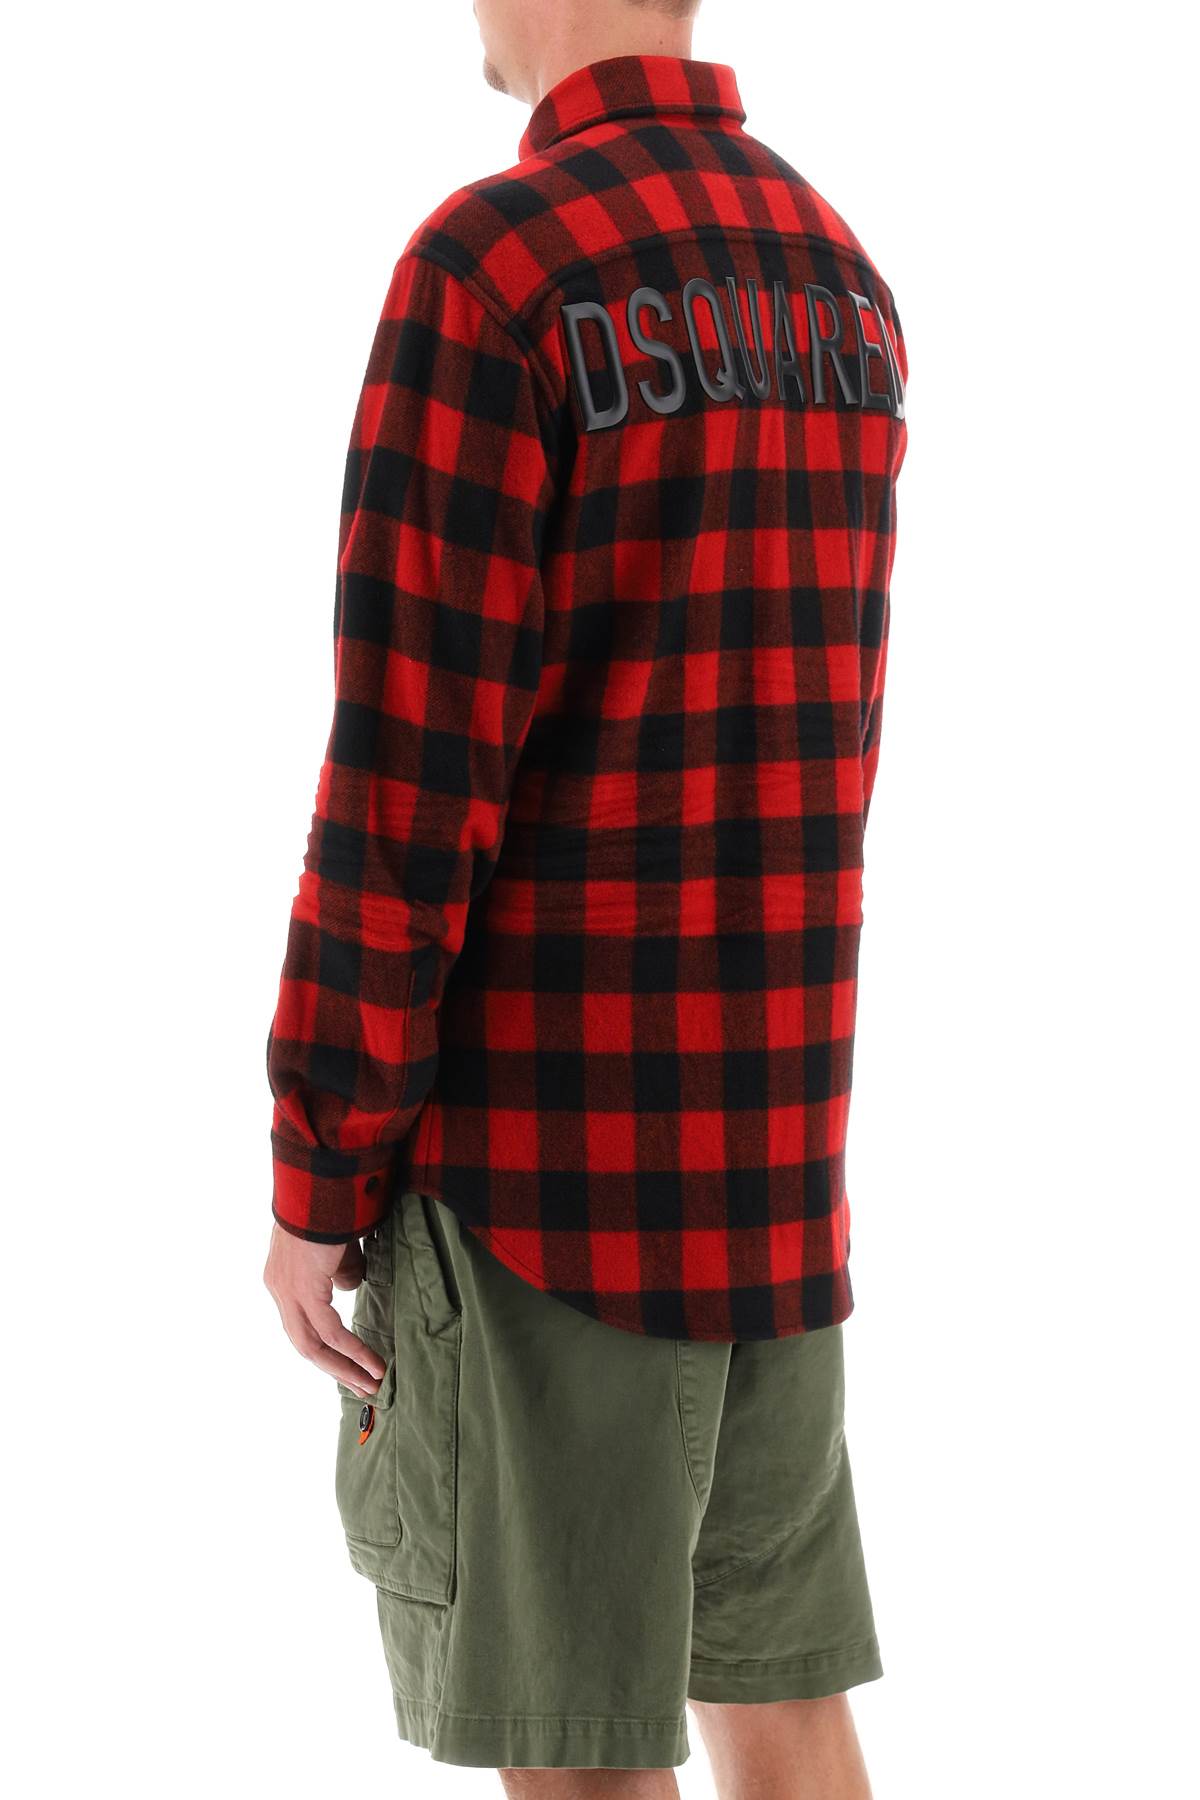 Dsquared2 shirt with check motif and back logo-2